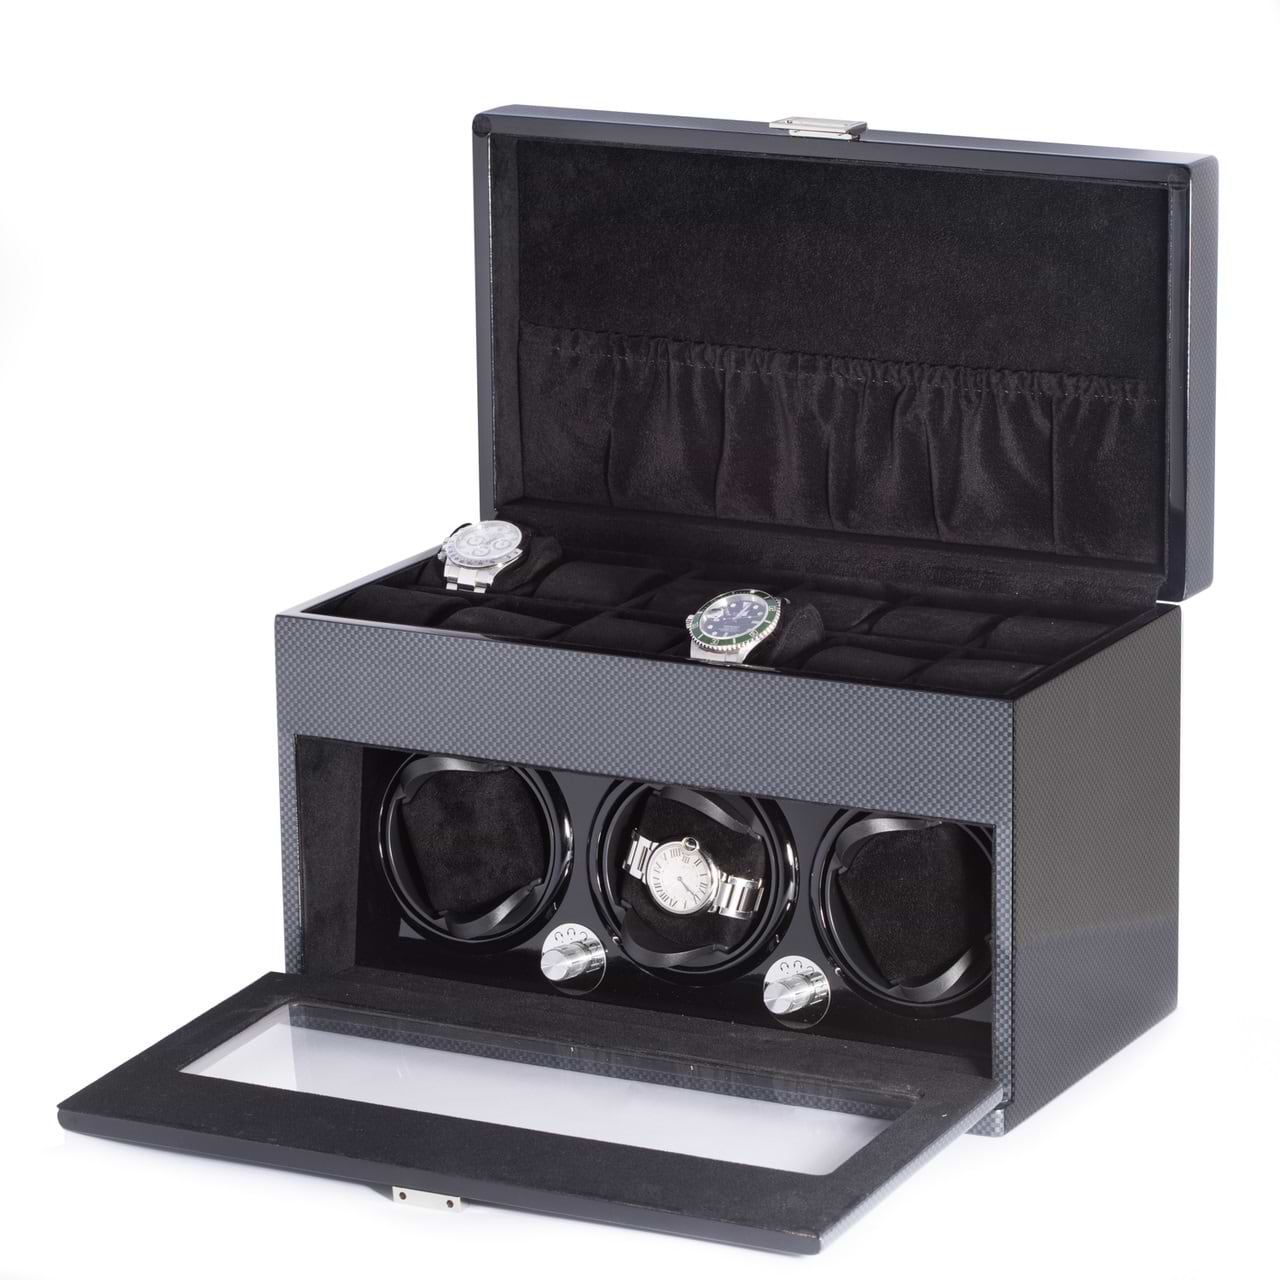 Carbon Fiber Steel Gray 3 Watch Winder w/ Settings for 12 Watches